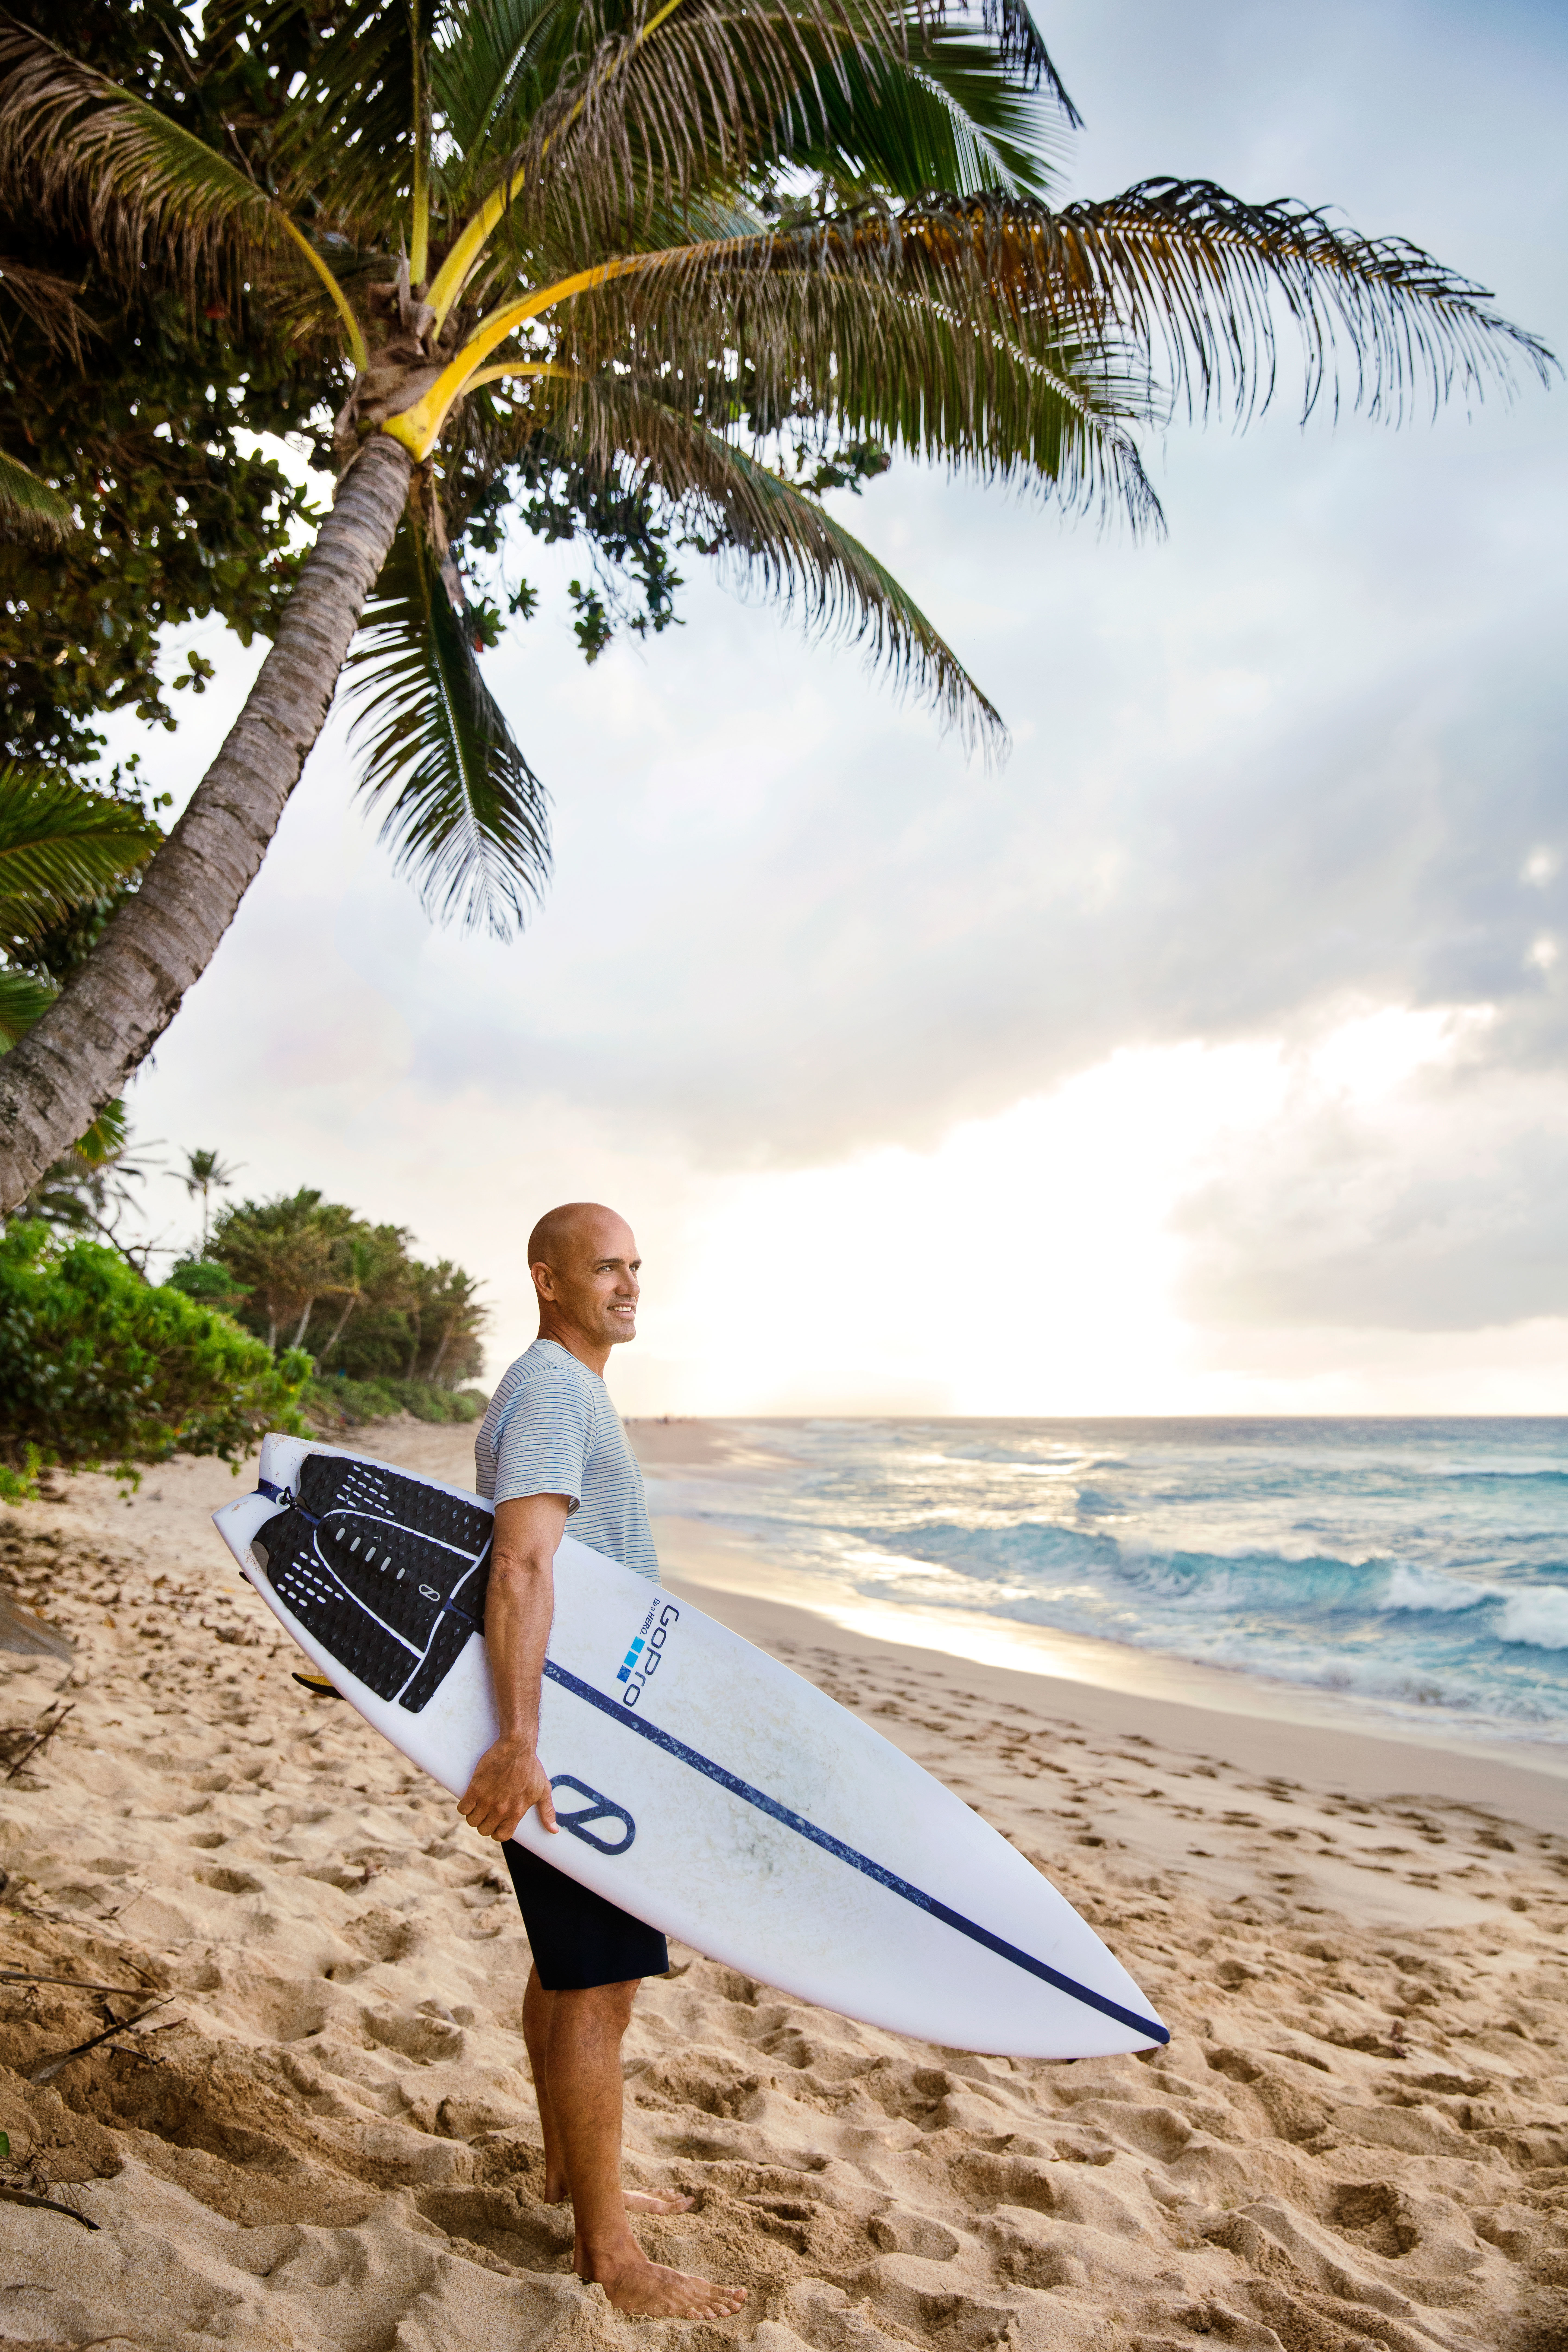 Kelly Slater designs a sustainable clothing line from recycled fishing nets  and plastic waste